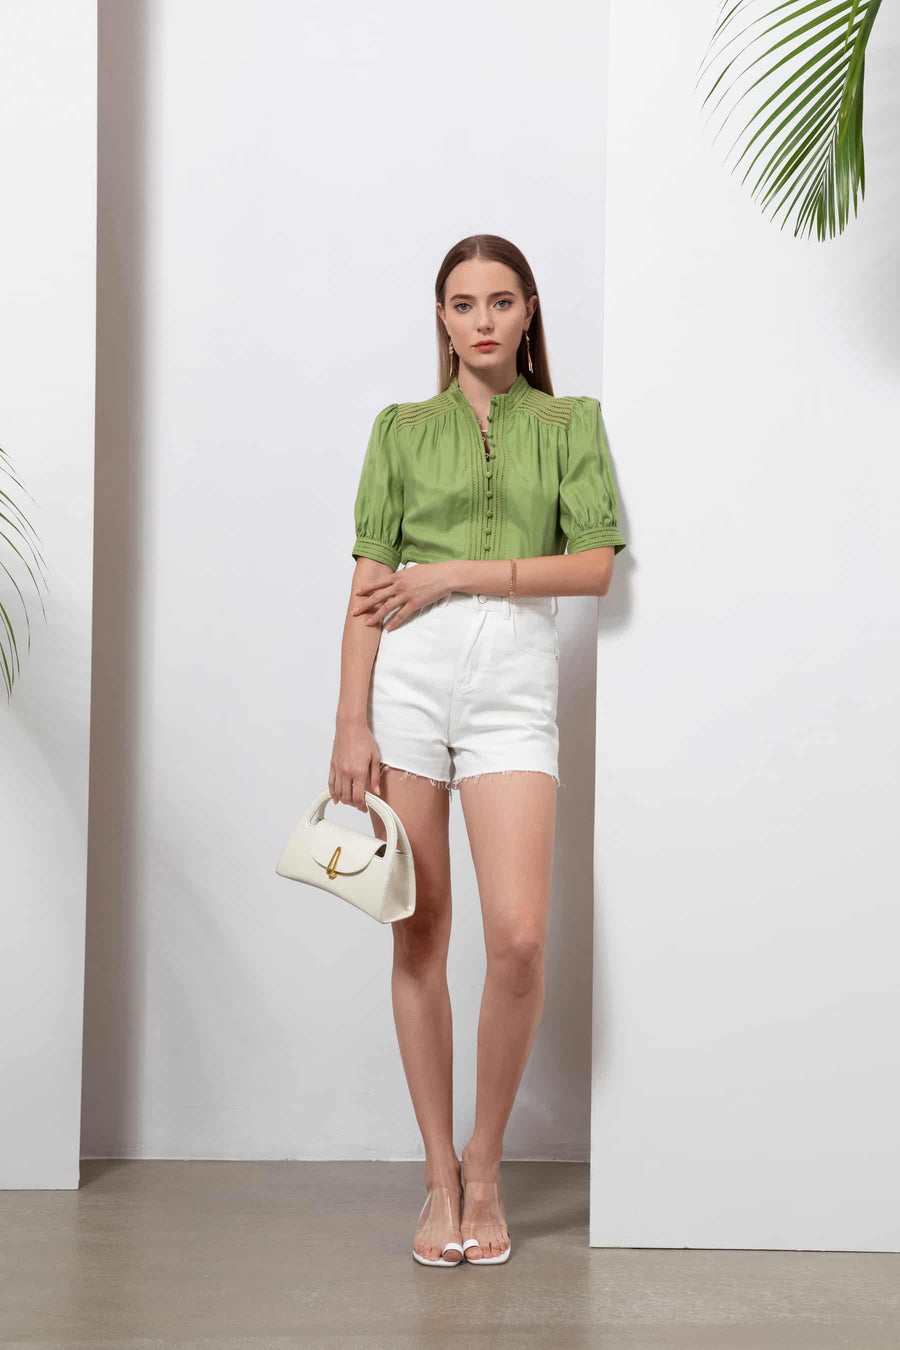 GDS Lucile Button Blouse | Tarragon BLOUSES BLOUSES BRUNCH Catch GDS GREEN HOLIDAY L M S SALE SPRING-SUMMER WORK XL XS